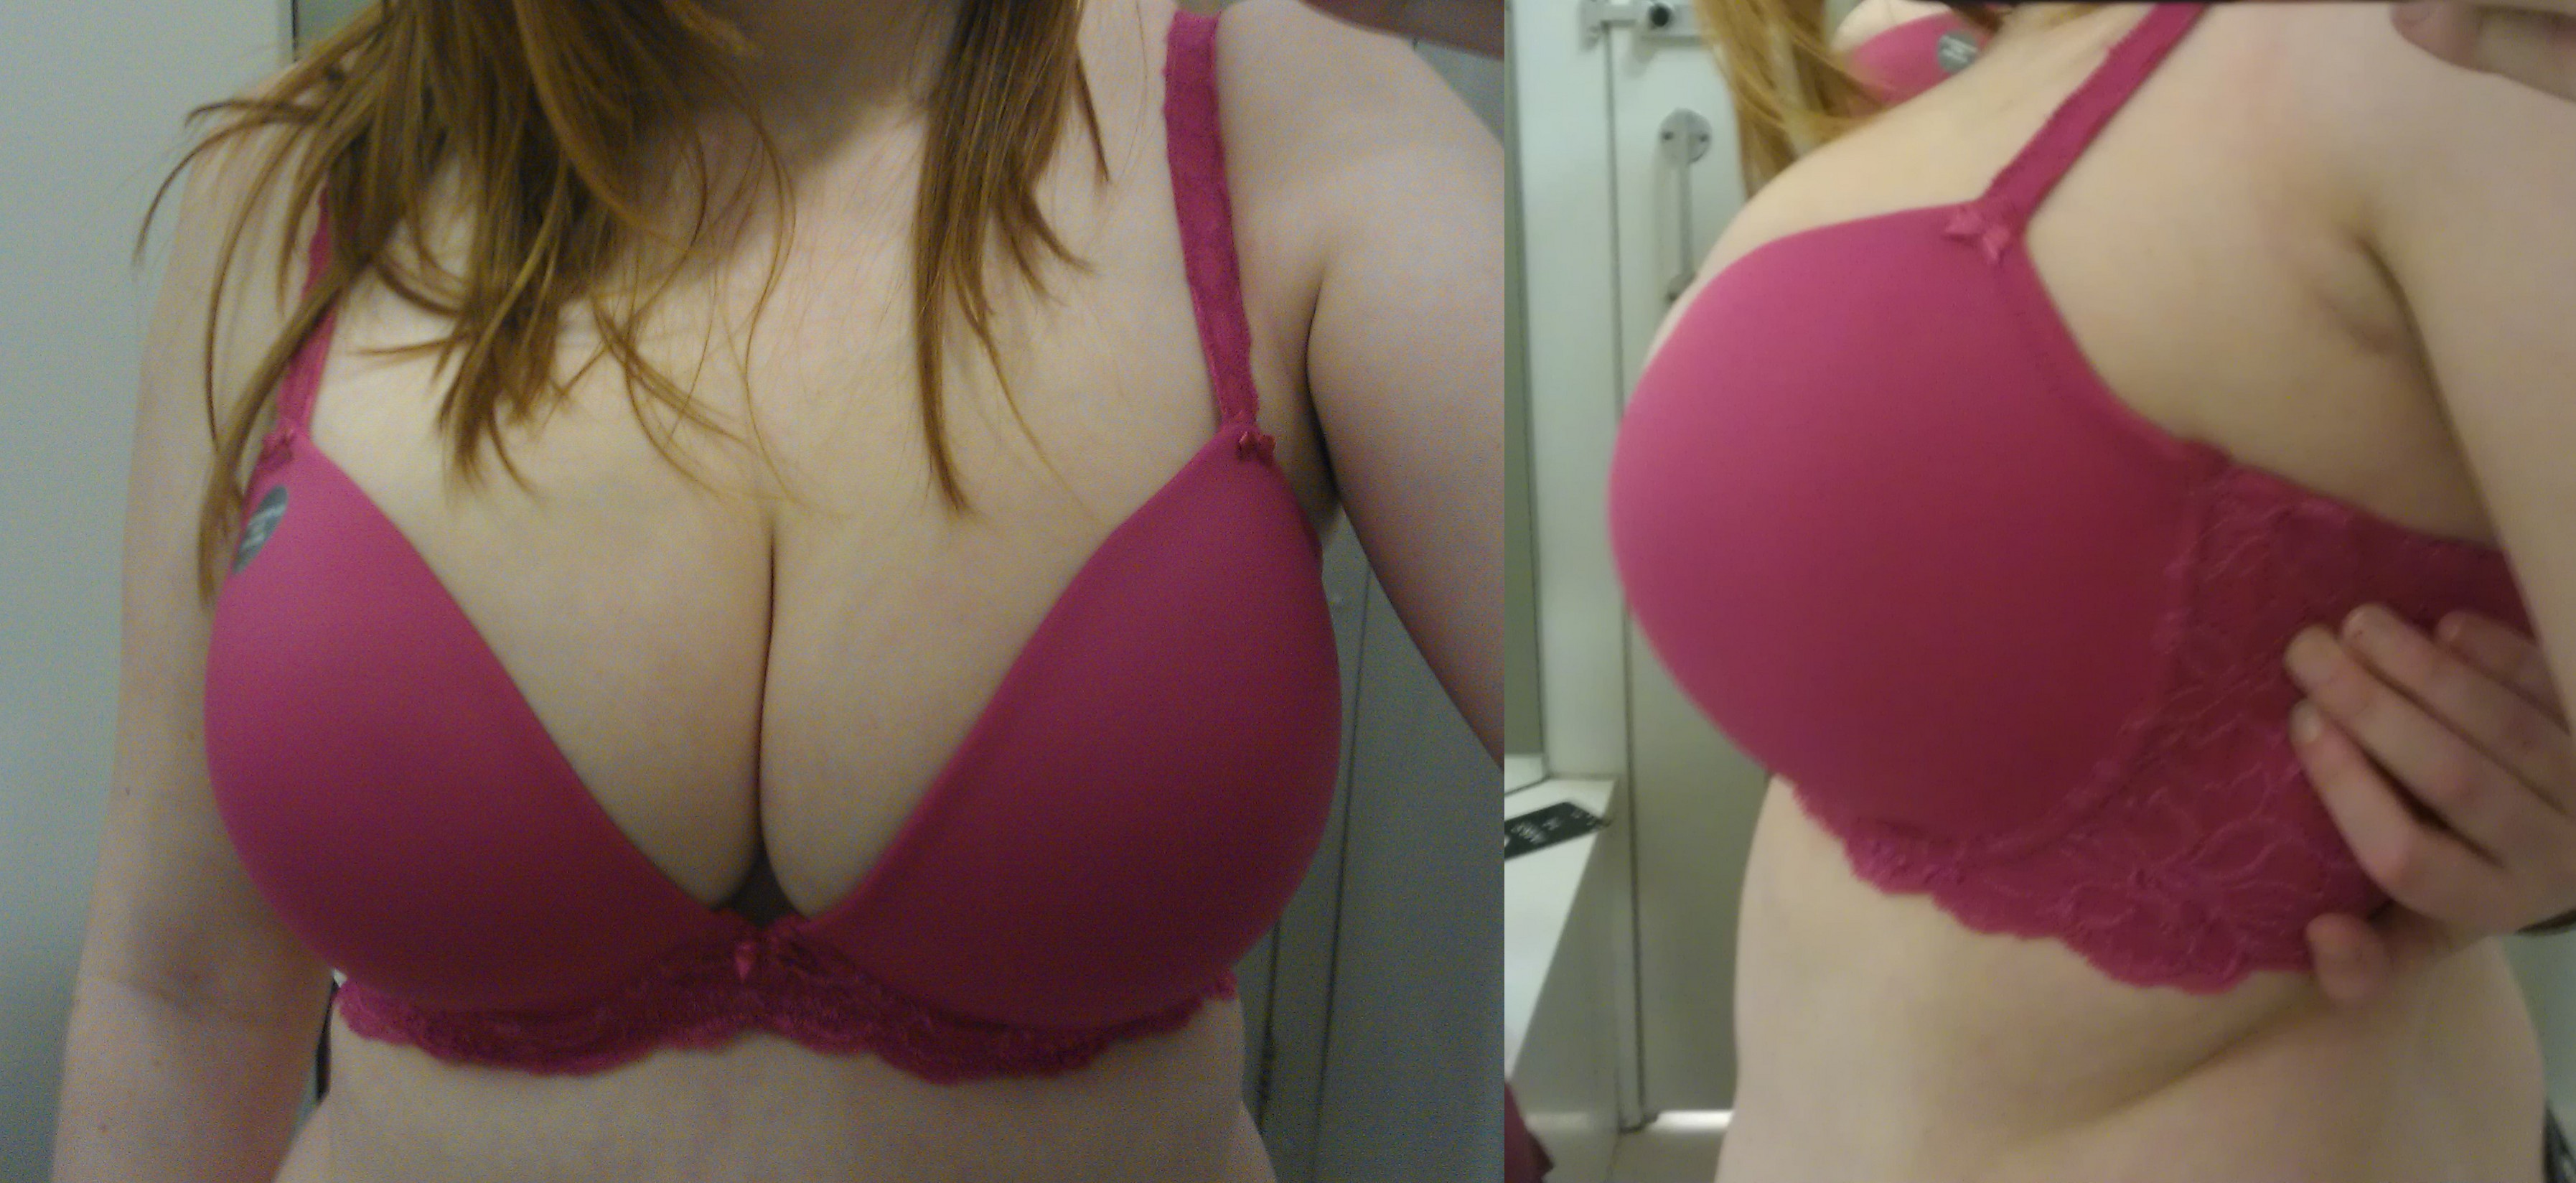 36G  Bras and Body Image